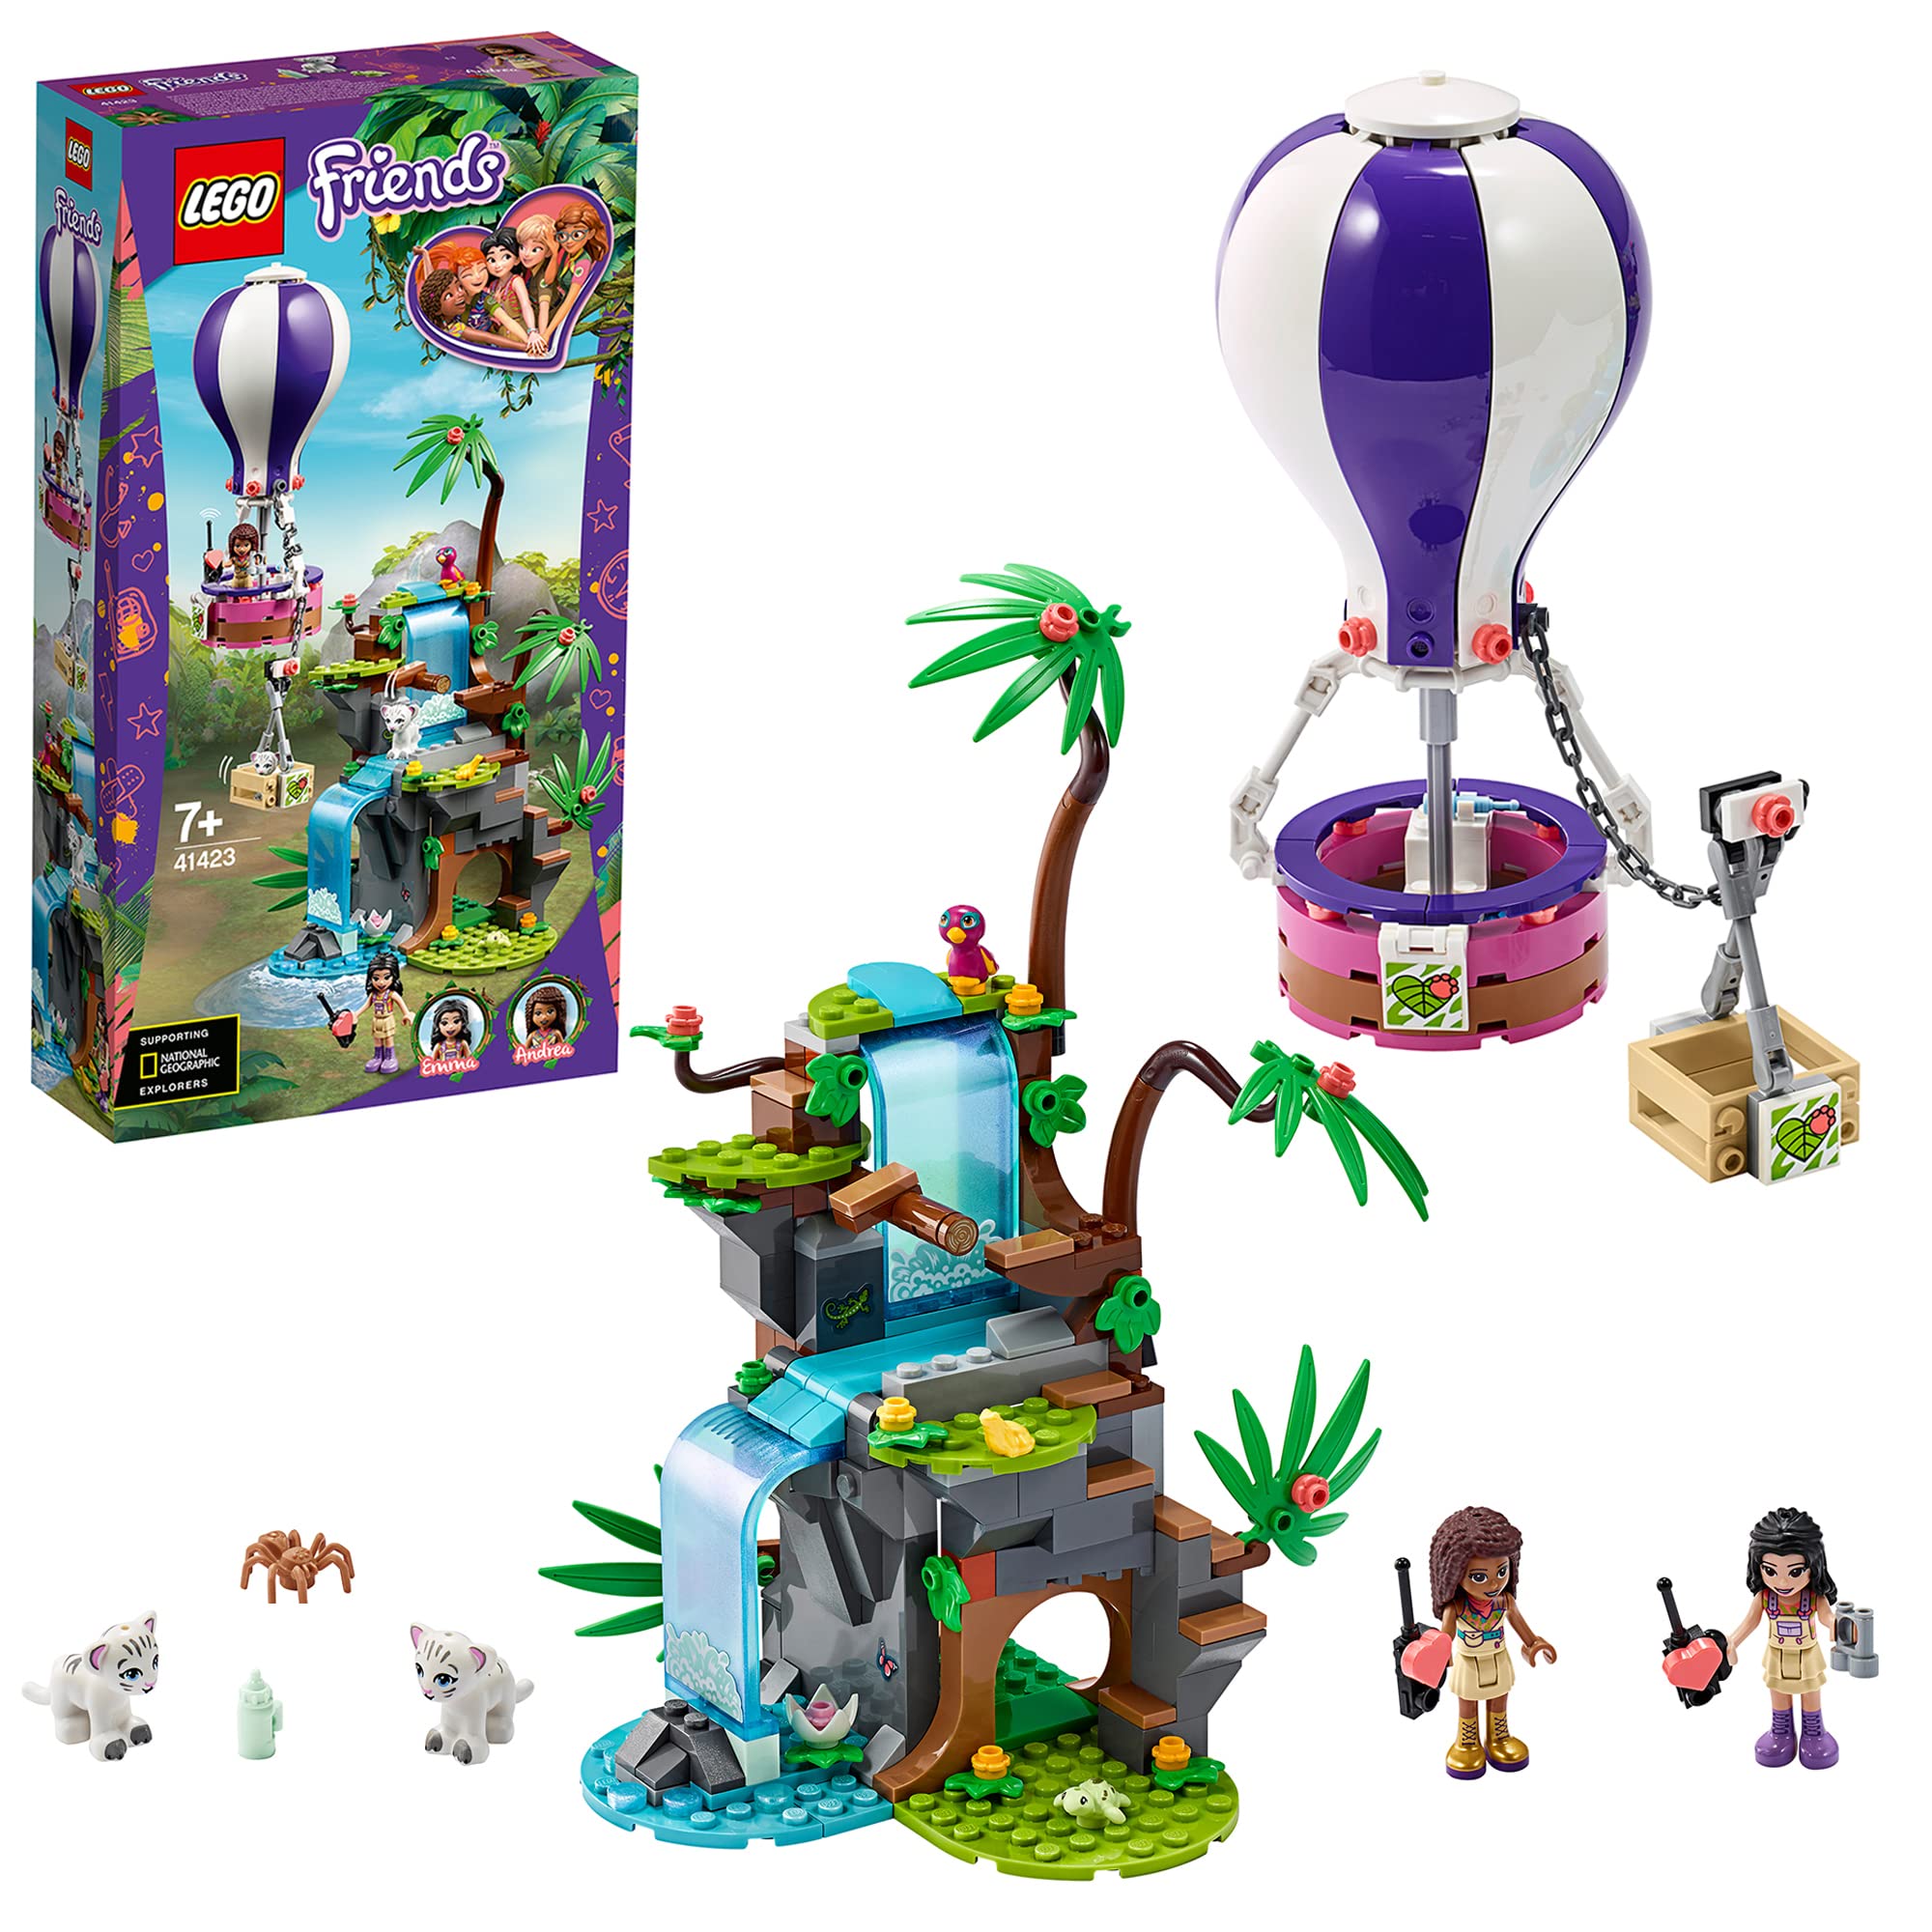 Mua Lego Friends 41423 Tiger Rescue with Hot Air Balloon, Jungle Rescue  Play Set with Andrea, Emma and Animal Figures trên Amazon Đức chính hãng  2022 | Giaonhan247